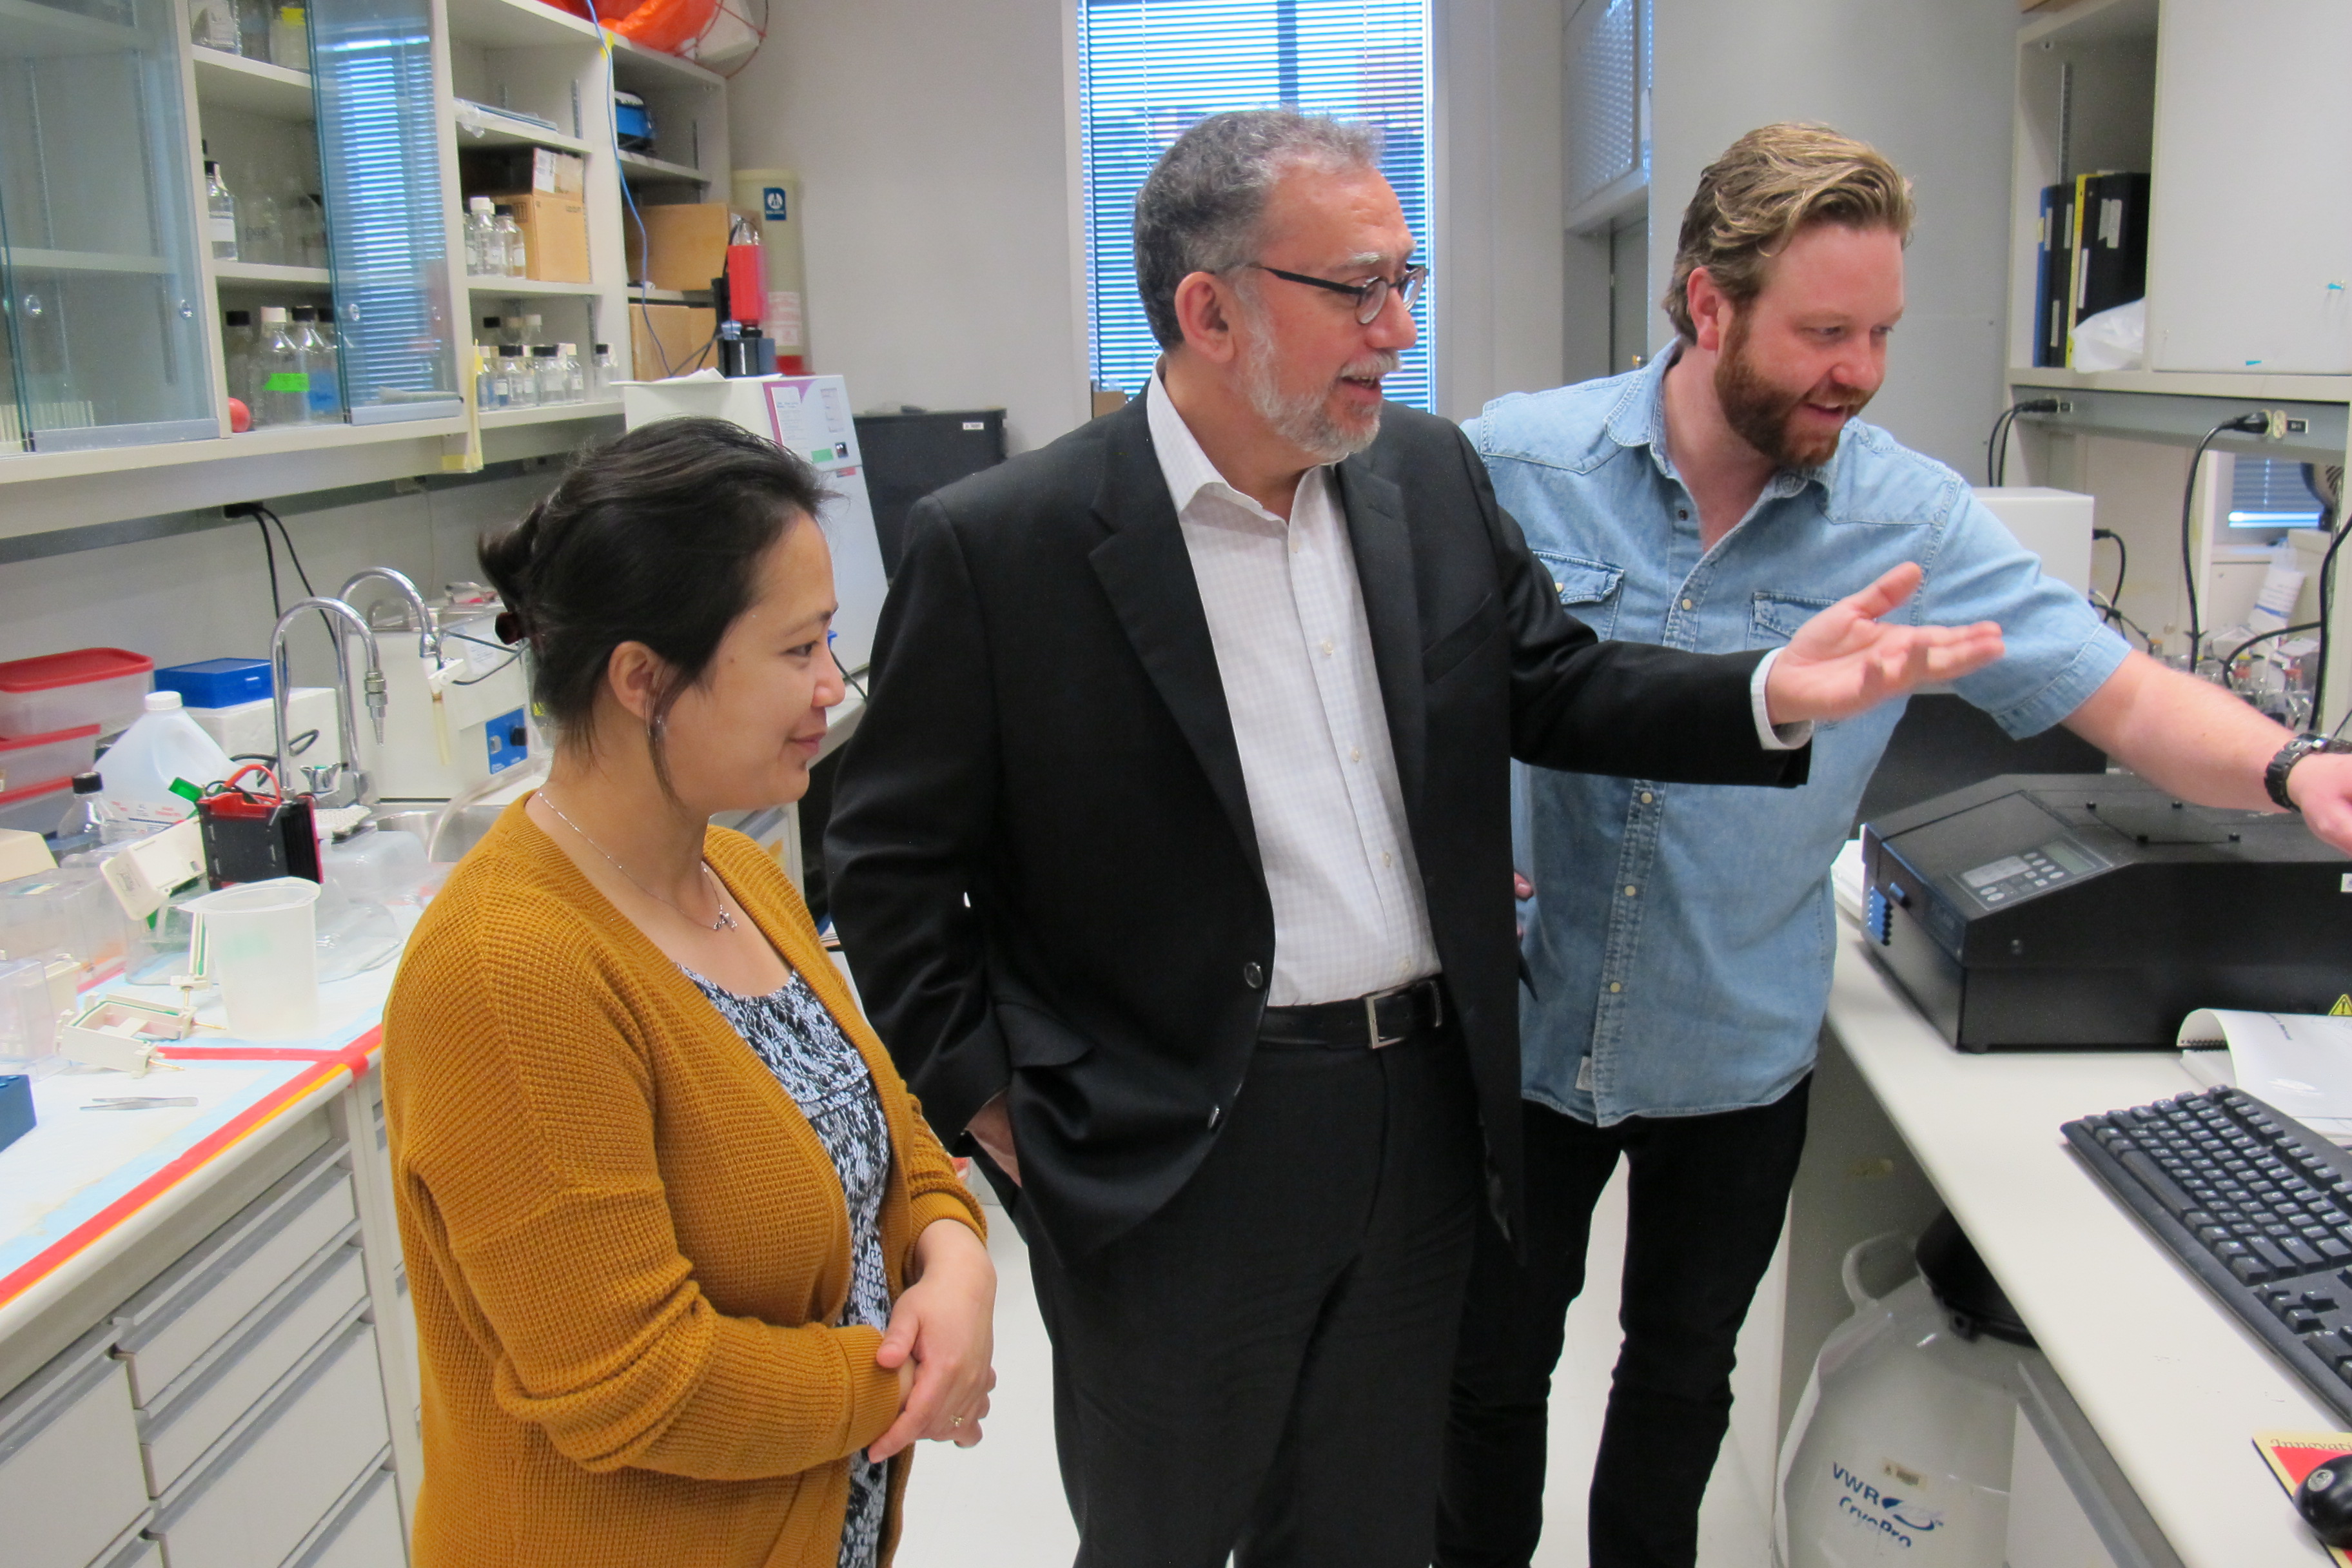 Harissios Vliagoftis speaks with researchers in his lab